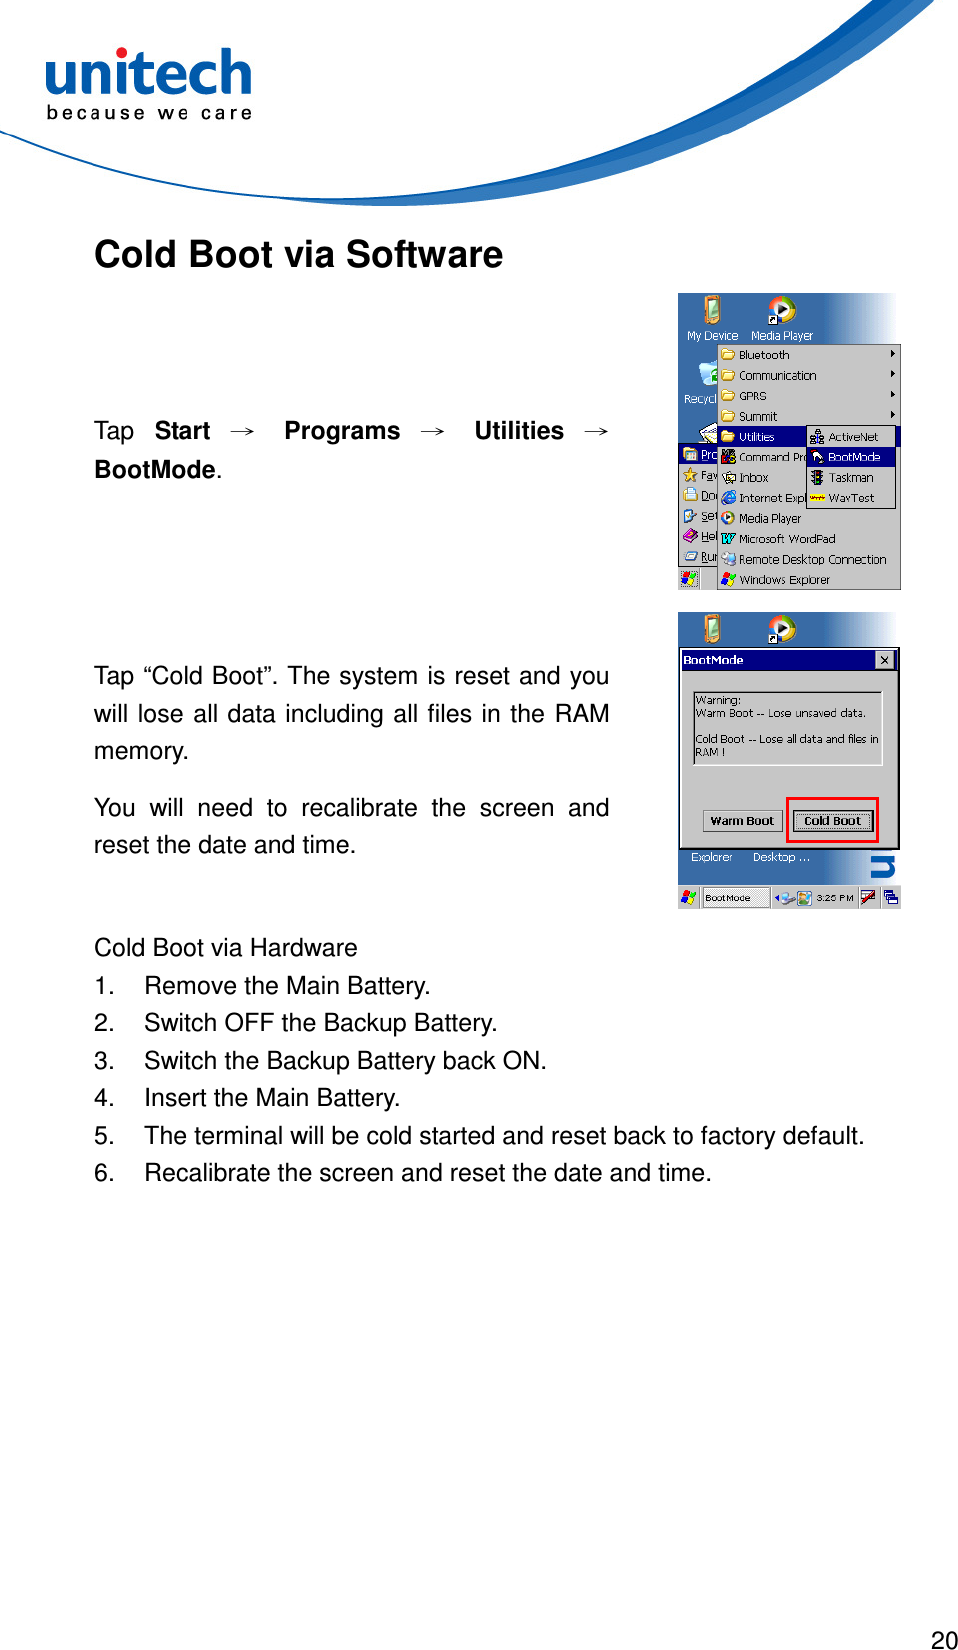  20  Cold Boot via Software Tap  Start → Programs → Utilities → BootMode.  Tap “Cold Boot”. The system is reset and you will lose all data including all files in the RAM memory. You  will  need  to  recalibrate  the  screen  and reset the date and time.  Cold Boot via Hardware 1.  Remove the Main Battery. 2.  Switch OFF the Backup Battery. 3.  Switch the Backup Battery back ON. 4.  Insert the Main Battery. 5.  The terminal will be cold started and reset back to factory default. 6.  Recalibrate the screen and reset the date and time. 